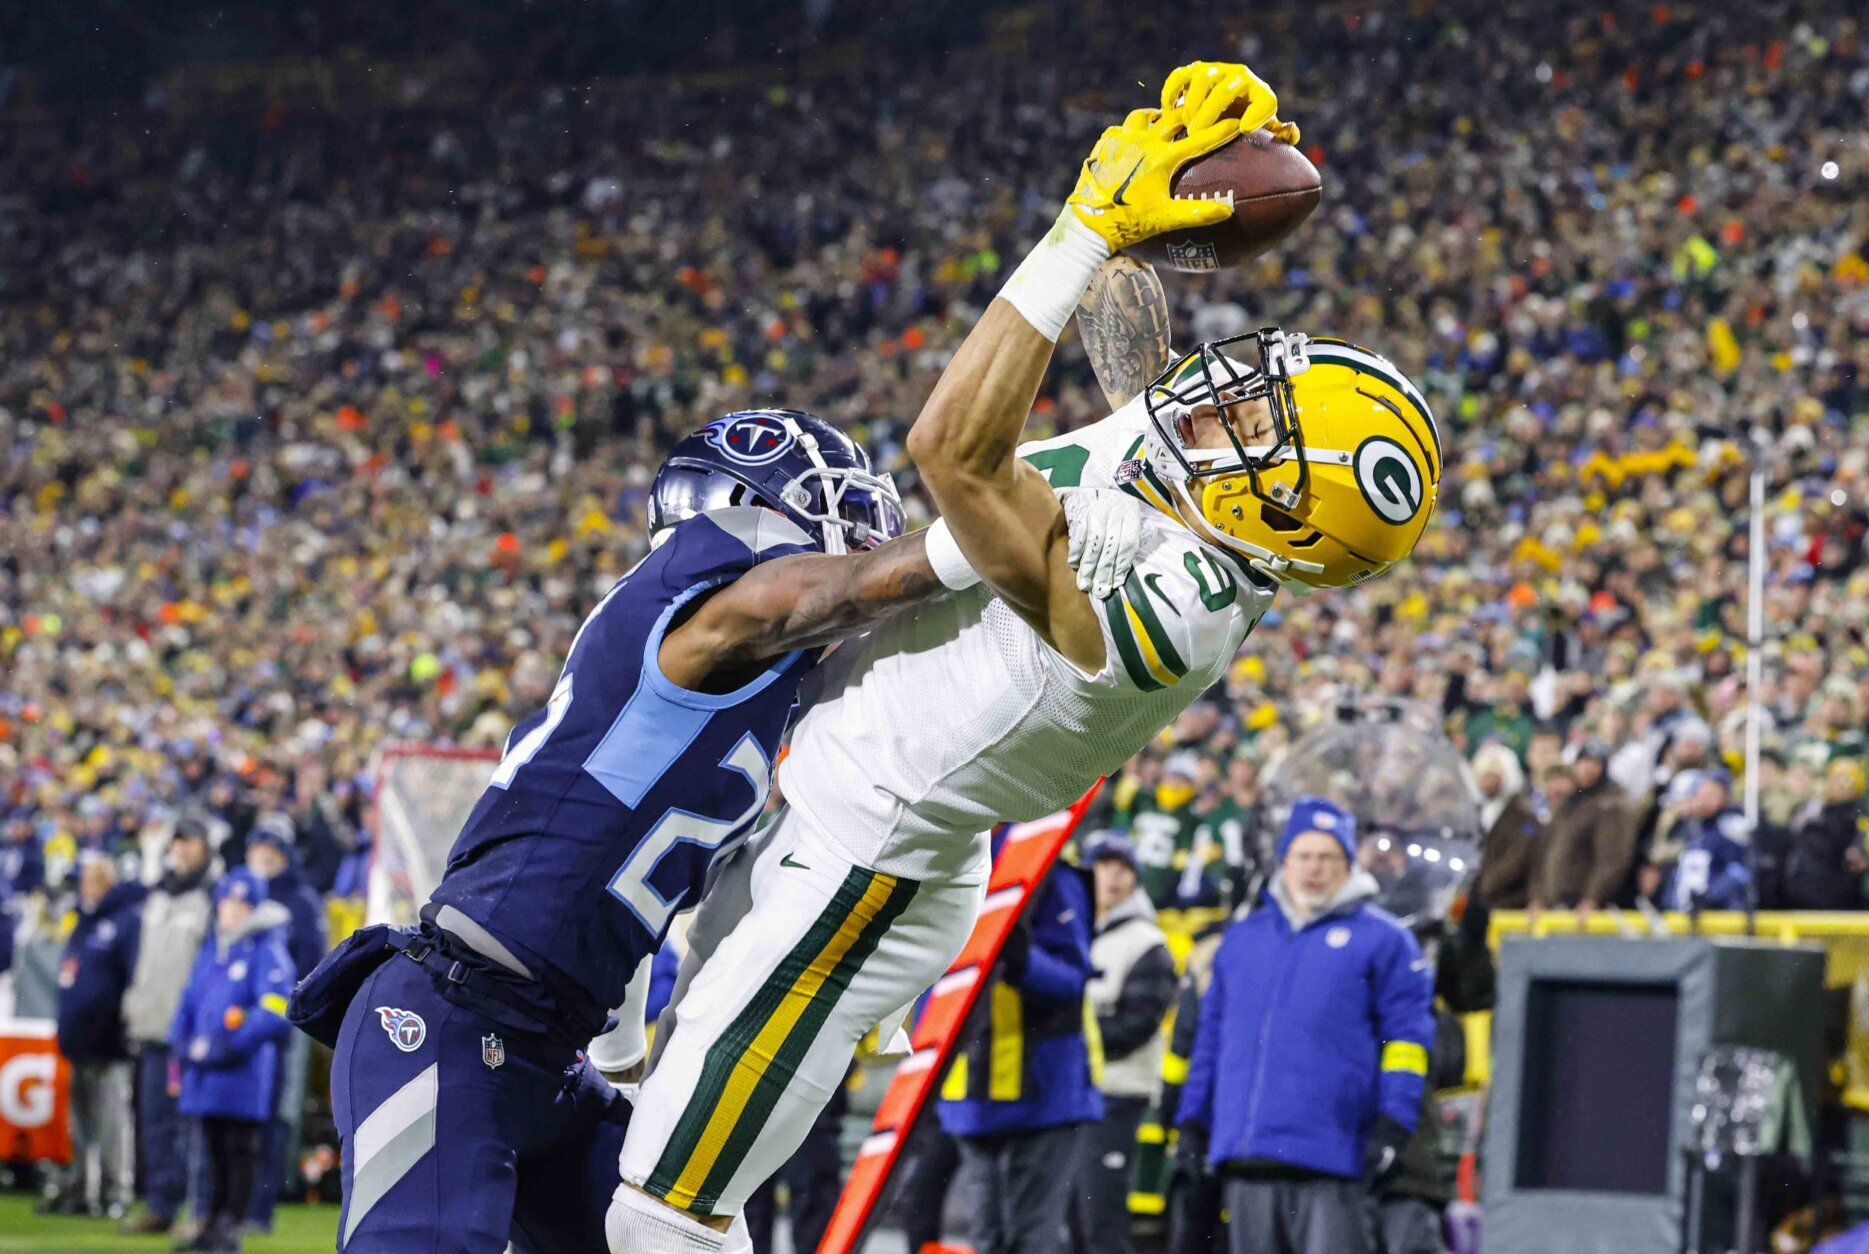 <p><em><strong>Titans 27</strong></em><br />
<em><strong>Packers 17</strong></em></p>
<p>Green Bay becoming the NFL’s all-time winningest franchise didn’t happen but this did: Christian Watson is the first Packers rookie receiver to have multiple touchdown catches in consecutive games since Super Bowl I hero Max McGee in 1954. Let&#8217;s end the narrative that Aaron Rodgers doesn&#8217;t have any weapons.</p>
